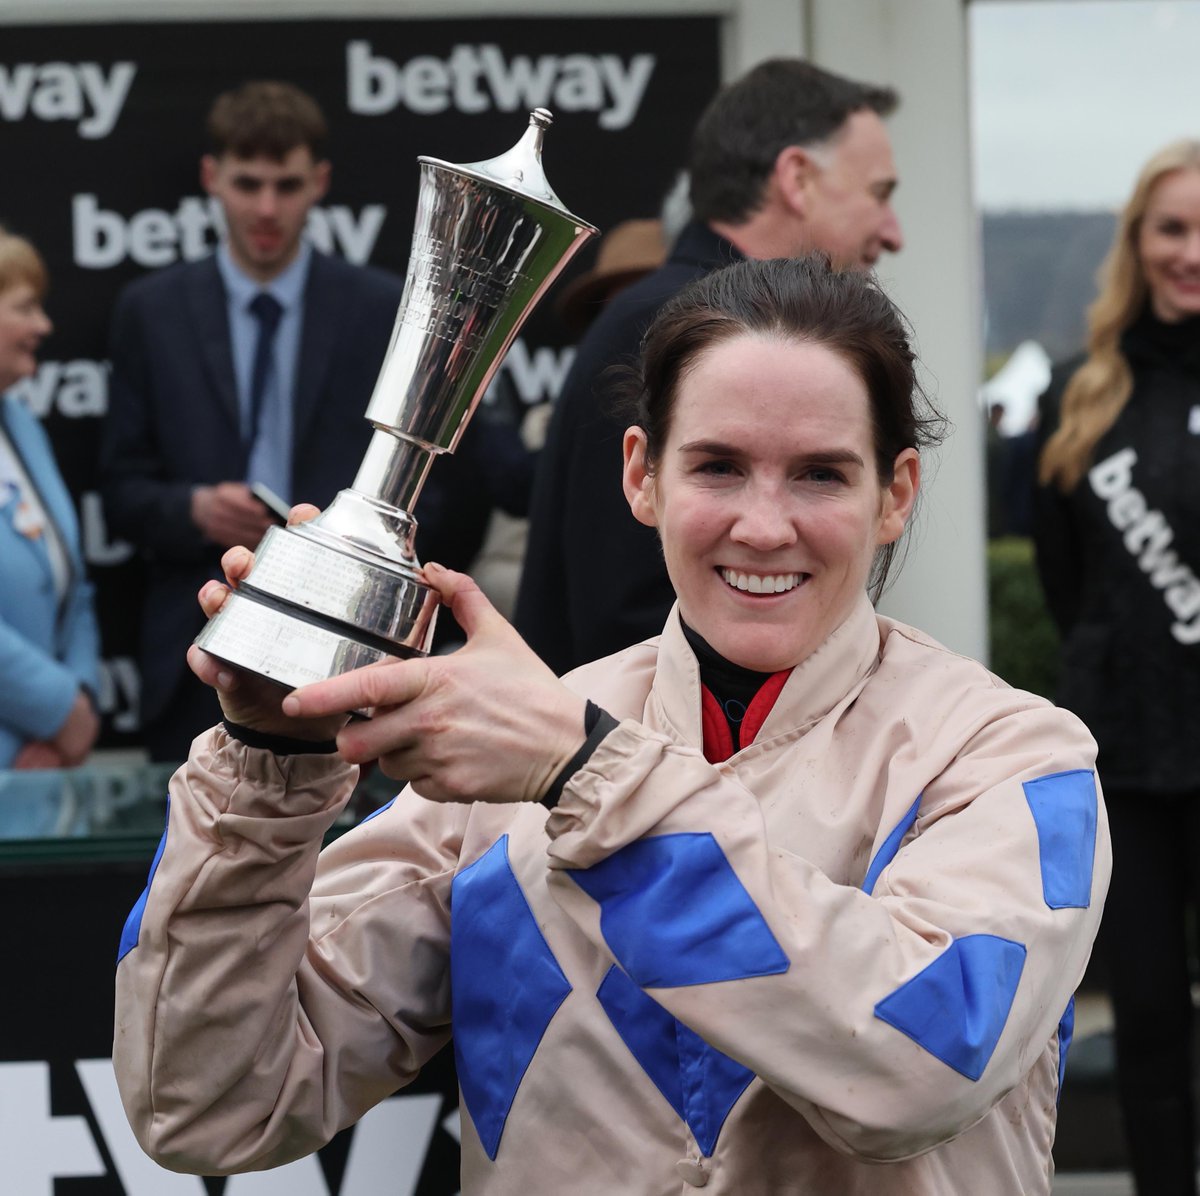 A golden month for @rachaelblackmor 🥇 She is crowned @IrishTimes Sportswoman of the Month for March for a THIRD year running 👏 Can she make a case for April's prize later today? 👀 #GreenTeam #EveryRacingMoment